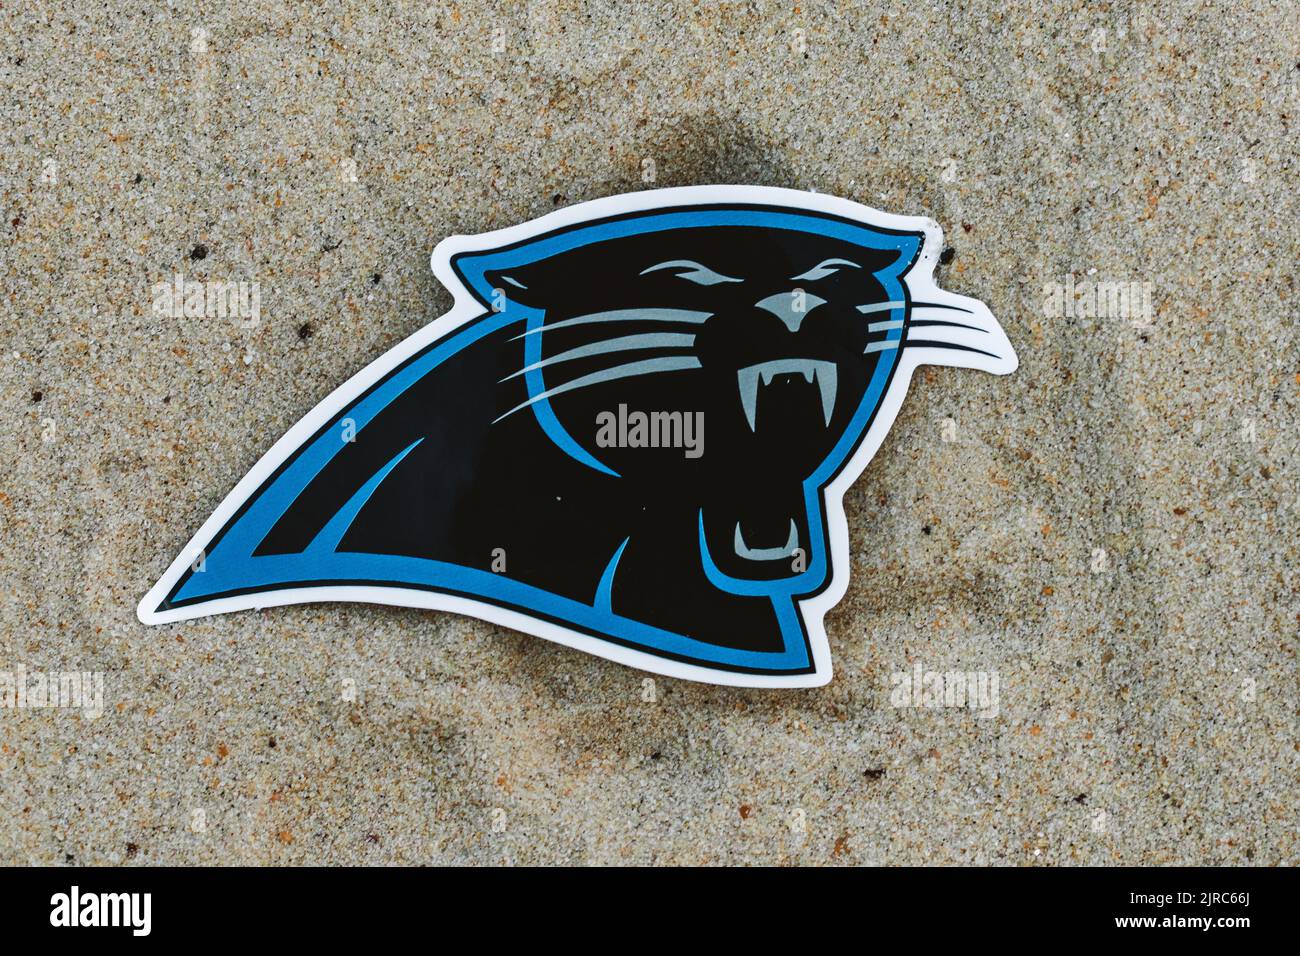 September 15, 2021, Moscow, Russia. The emblem of the Carolina Panthers football club on the sand of the beach. Stock Photo